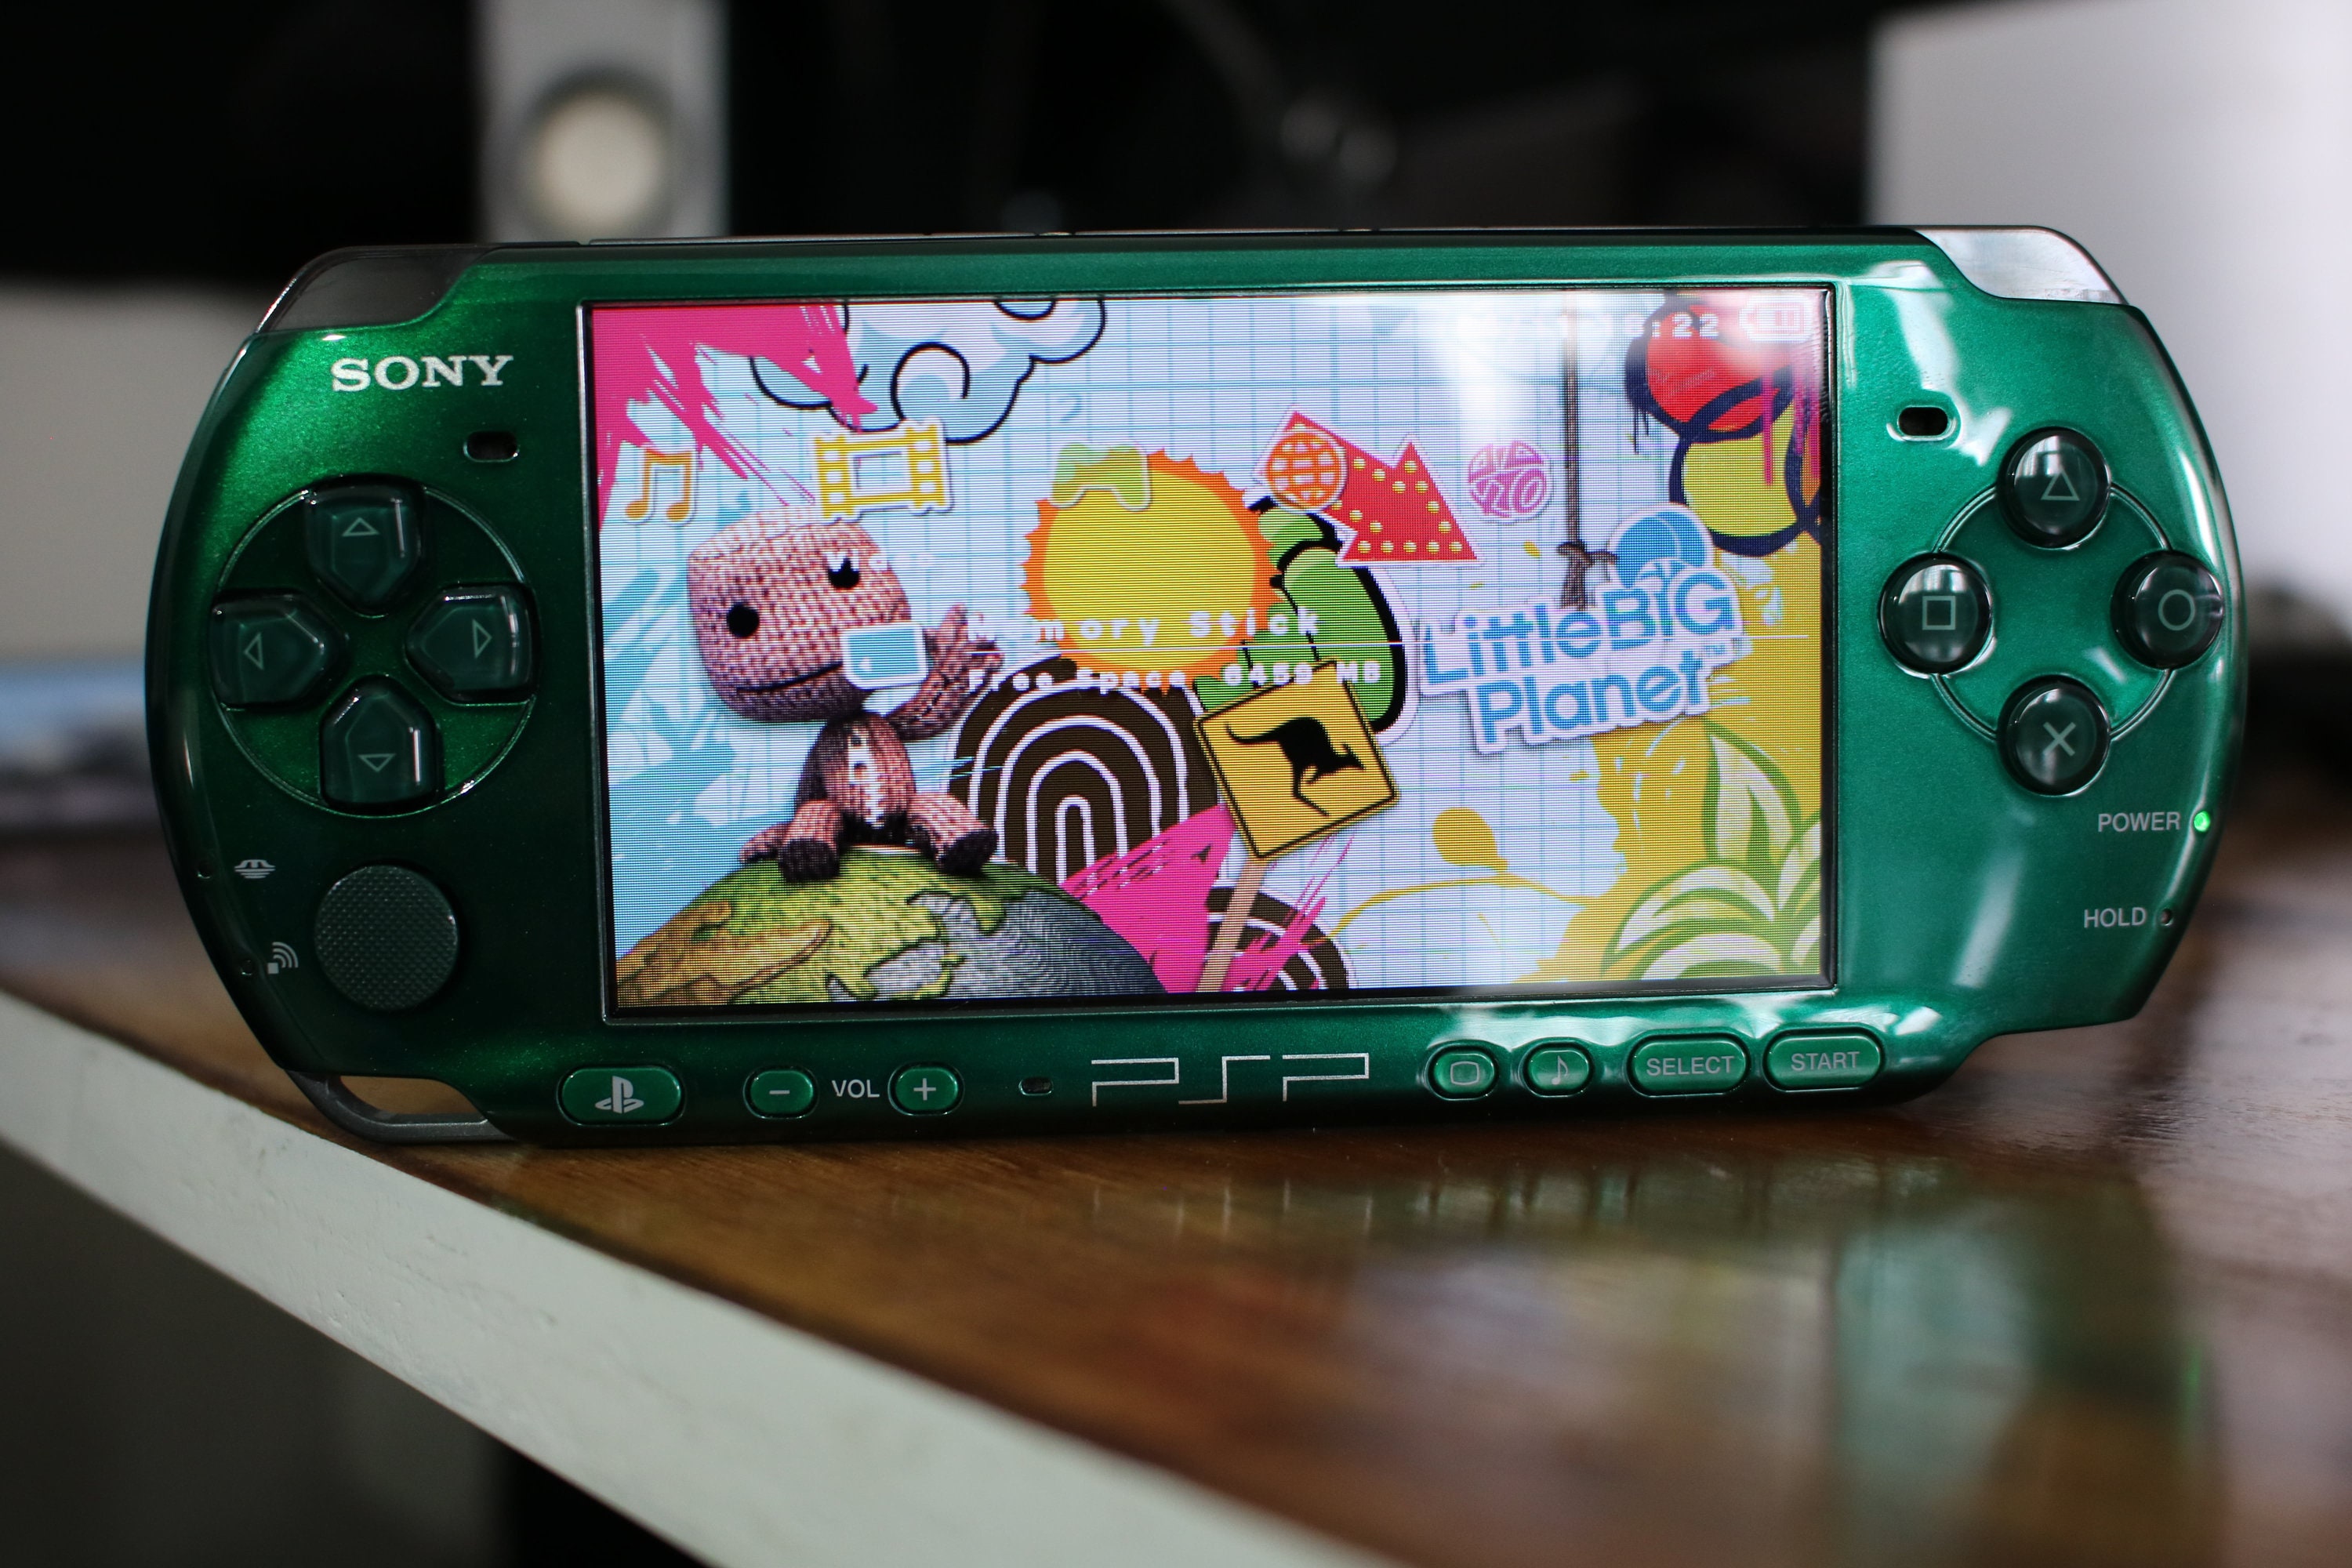 Modded Sony PSP 3000. Emerald Green picture